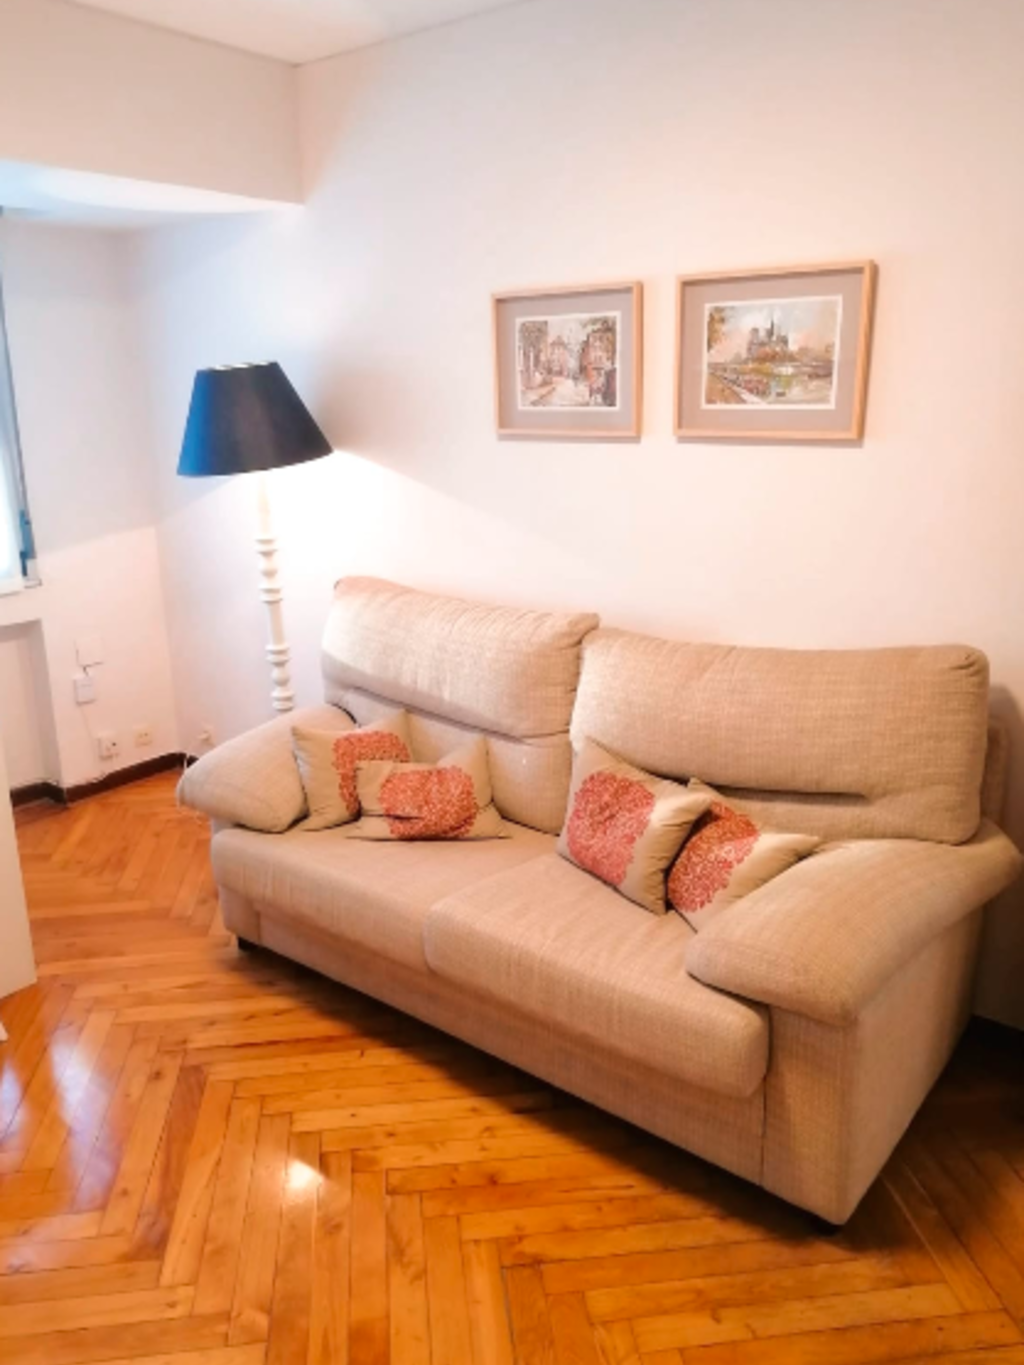 Apartment in the center of Oviedo